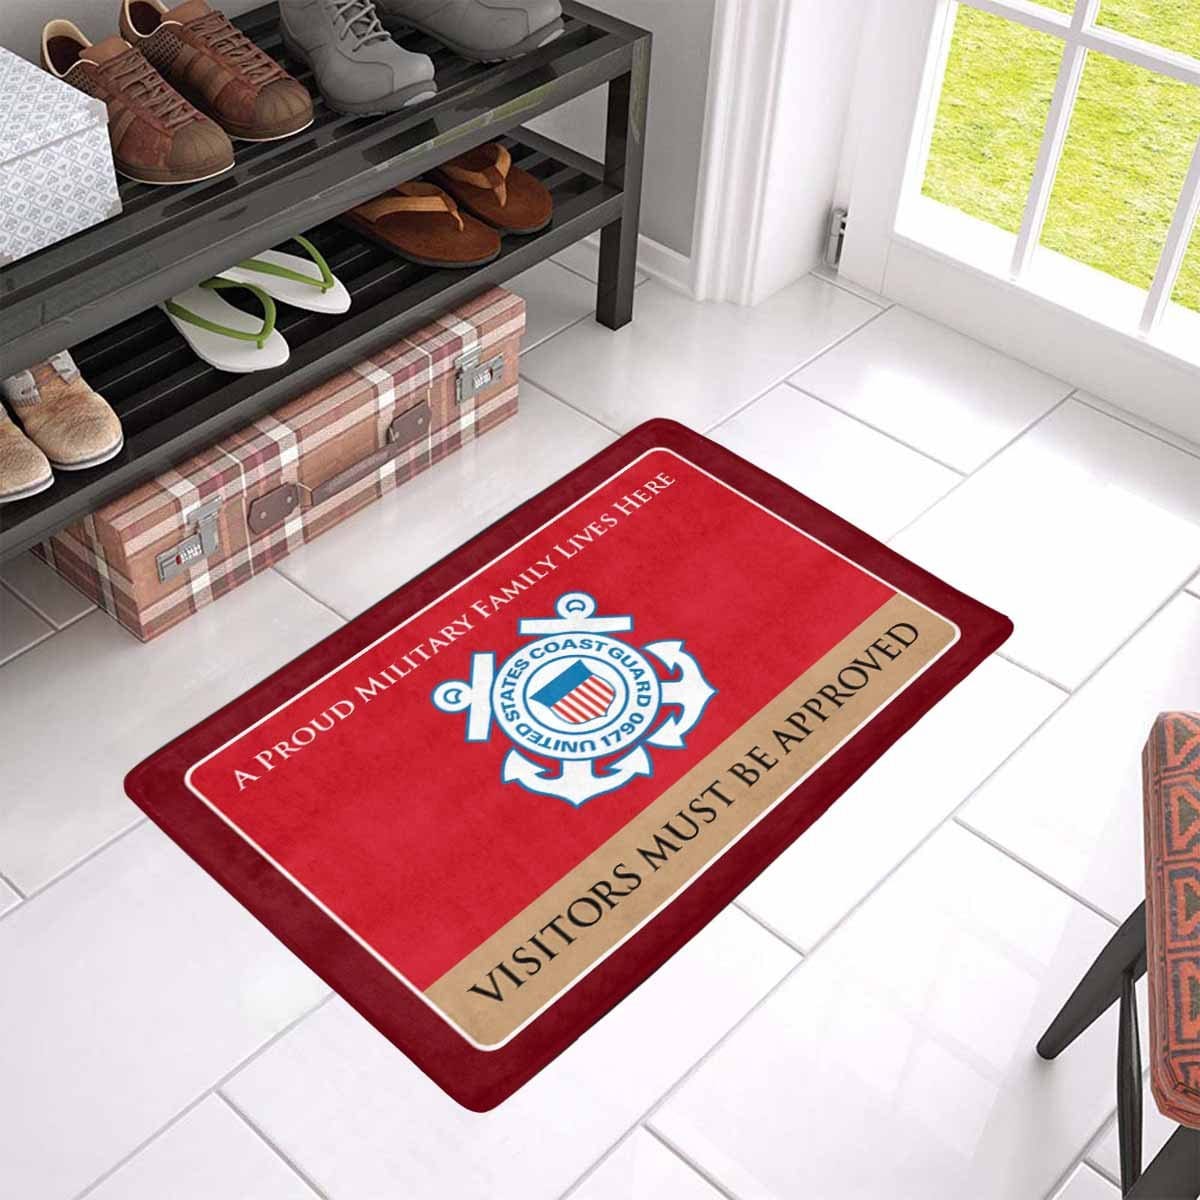 Proud Military Family USCG Doormat - Visitors must be approved-Doormat-USCG-Logo-Veterans Nation